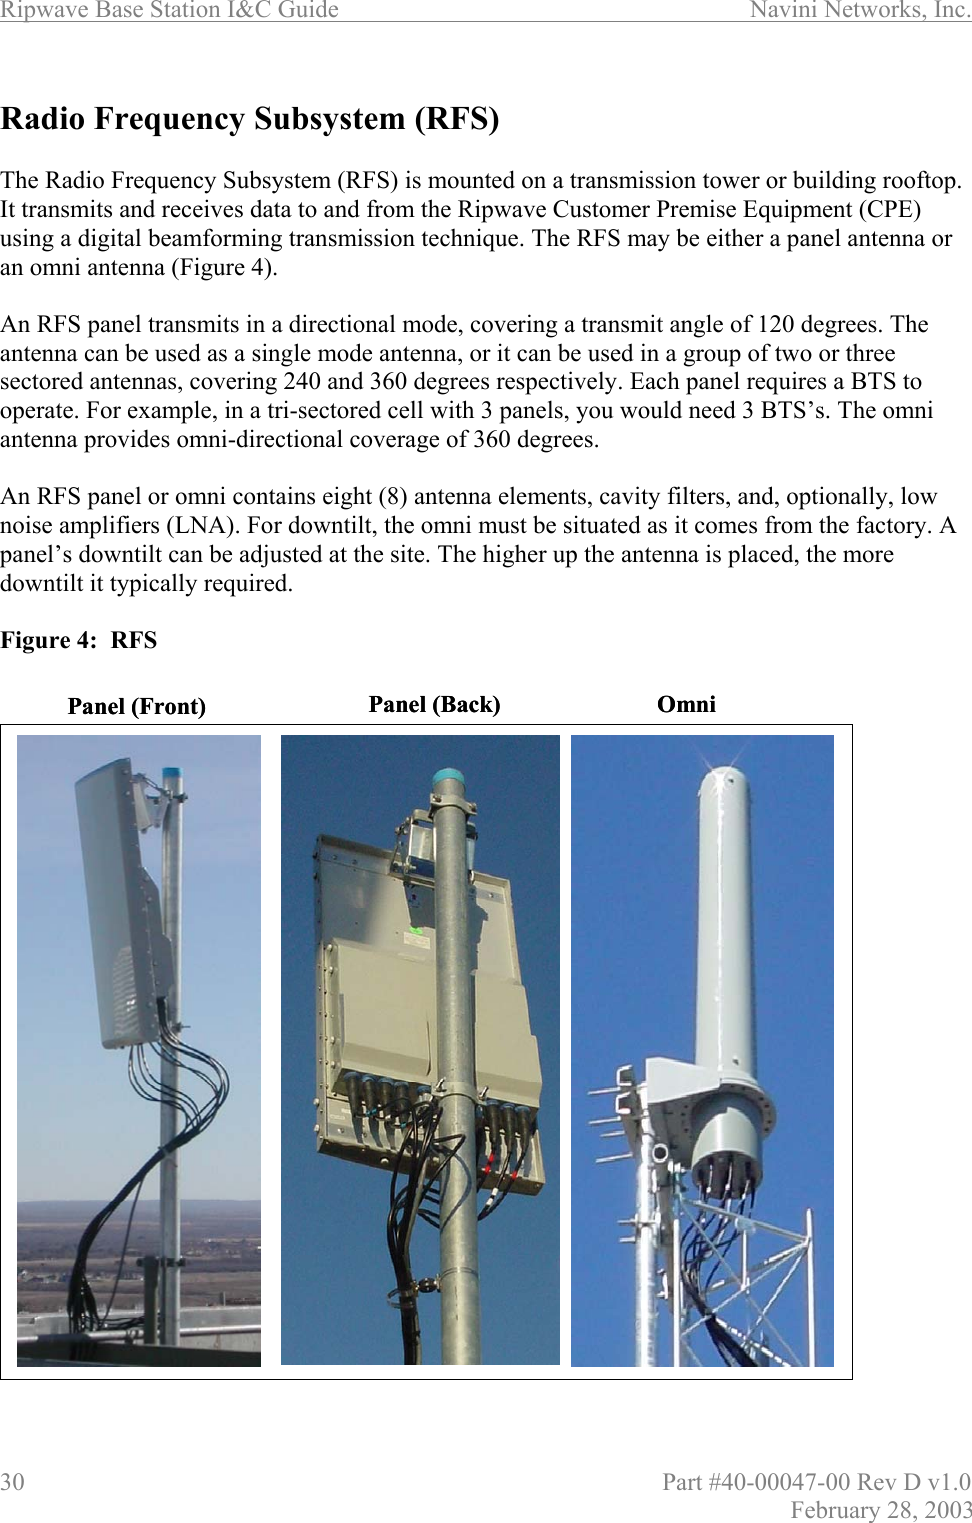 Ripwave Base Station I&amp;C Guide                      Navini Networks, Inc. 30                          Part #40-00047-00 Rev D v1.0 February 28, 2003  Radio Frequency Subsystem (RFS)  The Radio Frequency Subsystem (RFS) is mounted on a transmission tower or building rooftop. It transmits and receives data to and from the Ripwave Customer Premise Equipment (CPE) using a digital beamforming transmission technique. The RFS may be either a panel antenna or an omni antenna (Figure 4).   An RFS panel transmits in a directional mode, covering a transmit angle of 120 degrees. The antenna can be used as a single mode antenna, or it can be used in a group of two or three sectored antennas, covering 240 and 360 degrees respectively. Each panel requires a BTS to operate. For example, in a tri-sectored cell with 3 panels, you would need 3 BTS’s. The omni antenna provides omni-directional coverage of 360 degrees.  An RFS panel or omni contains eight (8) antenna elements, cavity filters, and, optionally, low noise amplifiers (LNA). For downtilt, the omni must be situated as it comes from the factory. A panel’s downtilt can be adjusted at the site. The higher up the antenna is placed, the more downtilt it typically required.  Figure 4:  RFS                            Panel (Front) OmniPanel (Back) Panel (Front) OmniPanel (Back)